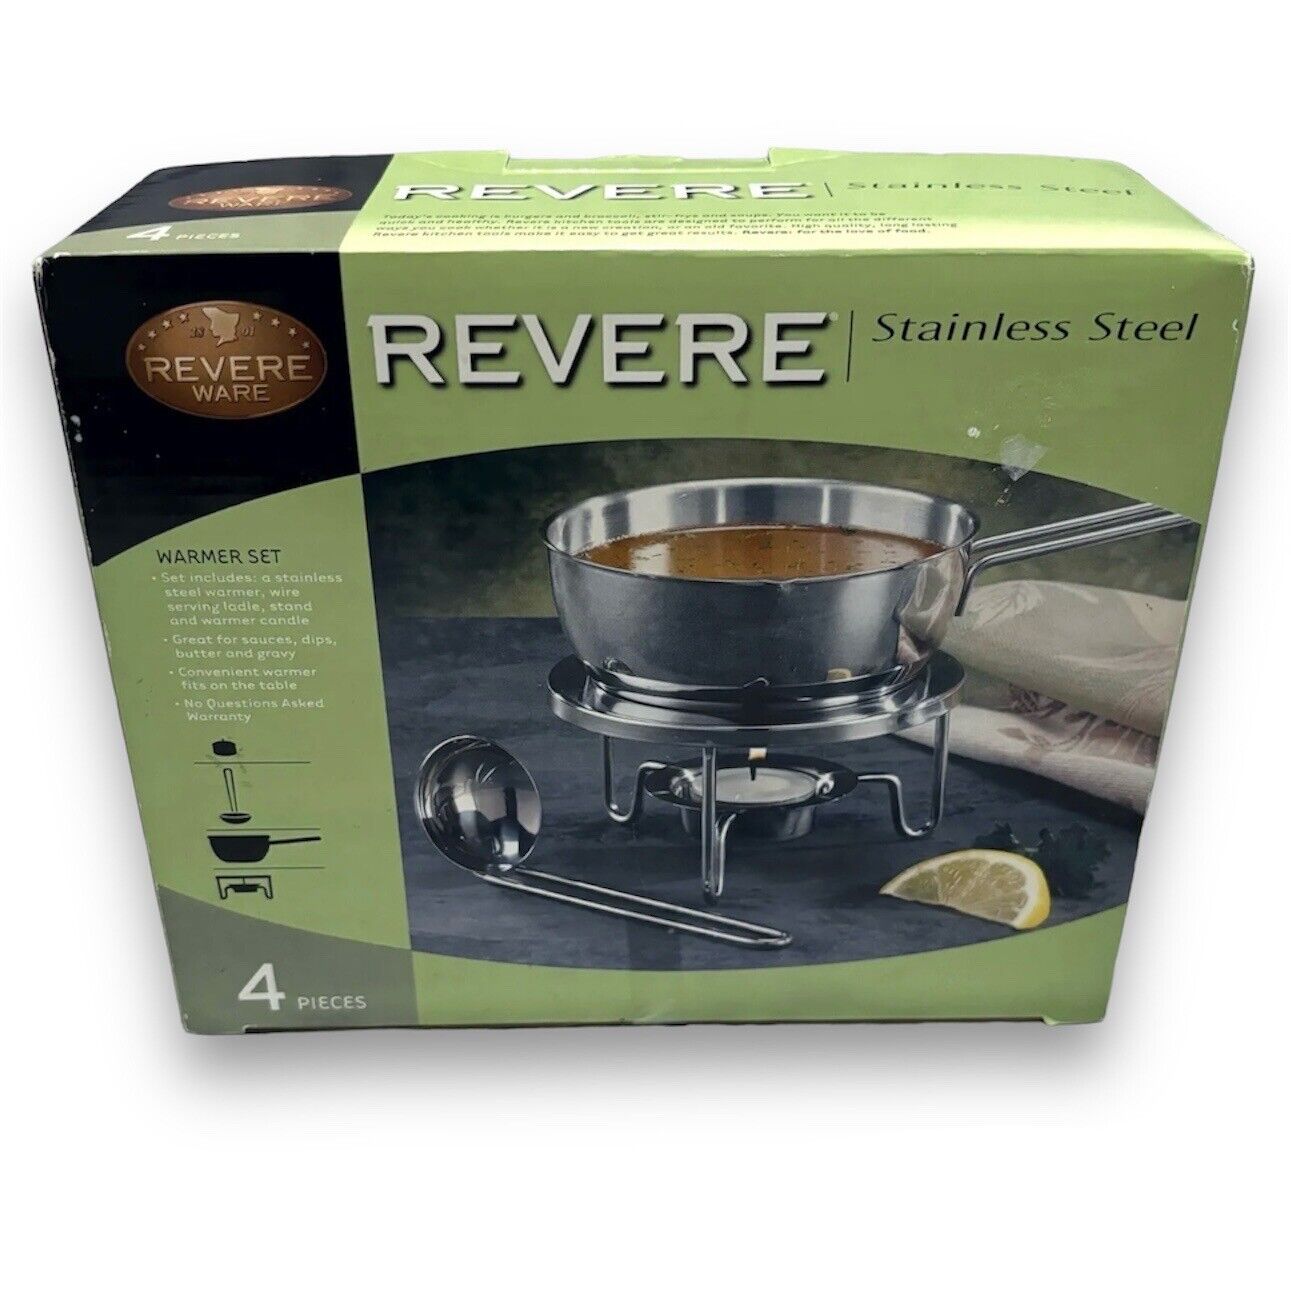 New Revere Ware Stainless Steel 4Pc Candle Warmer Set Camping Sauce Gravy Butter